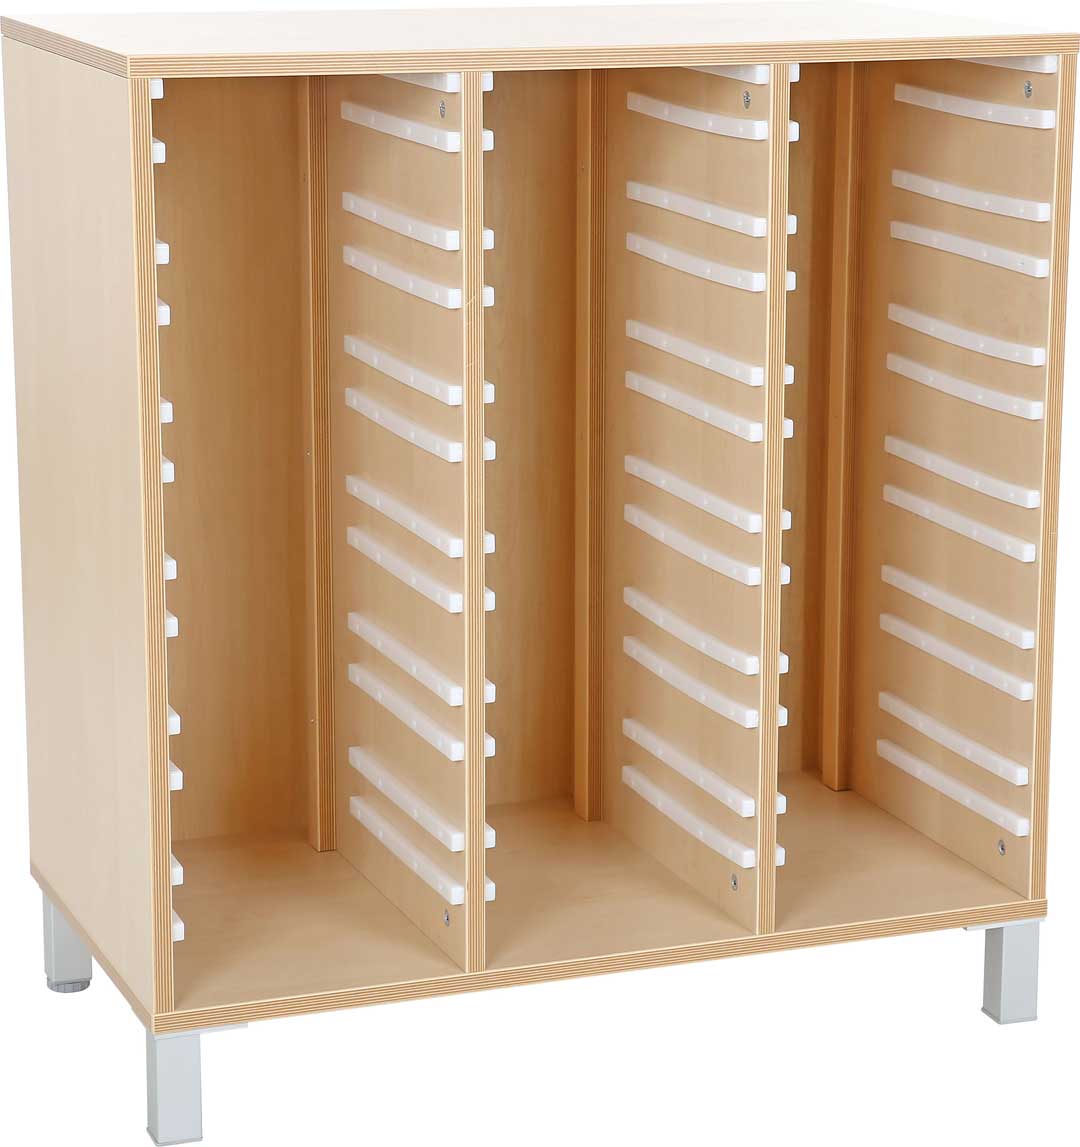 M Cabinet for Plastic Containers 3 Rows with Legs